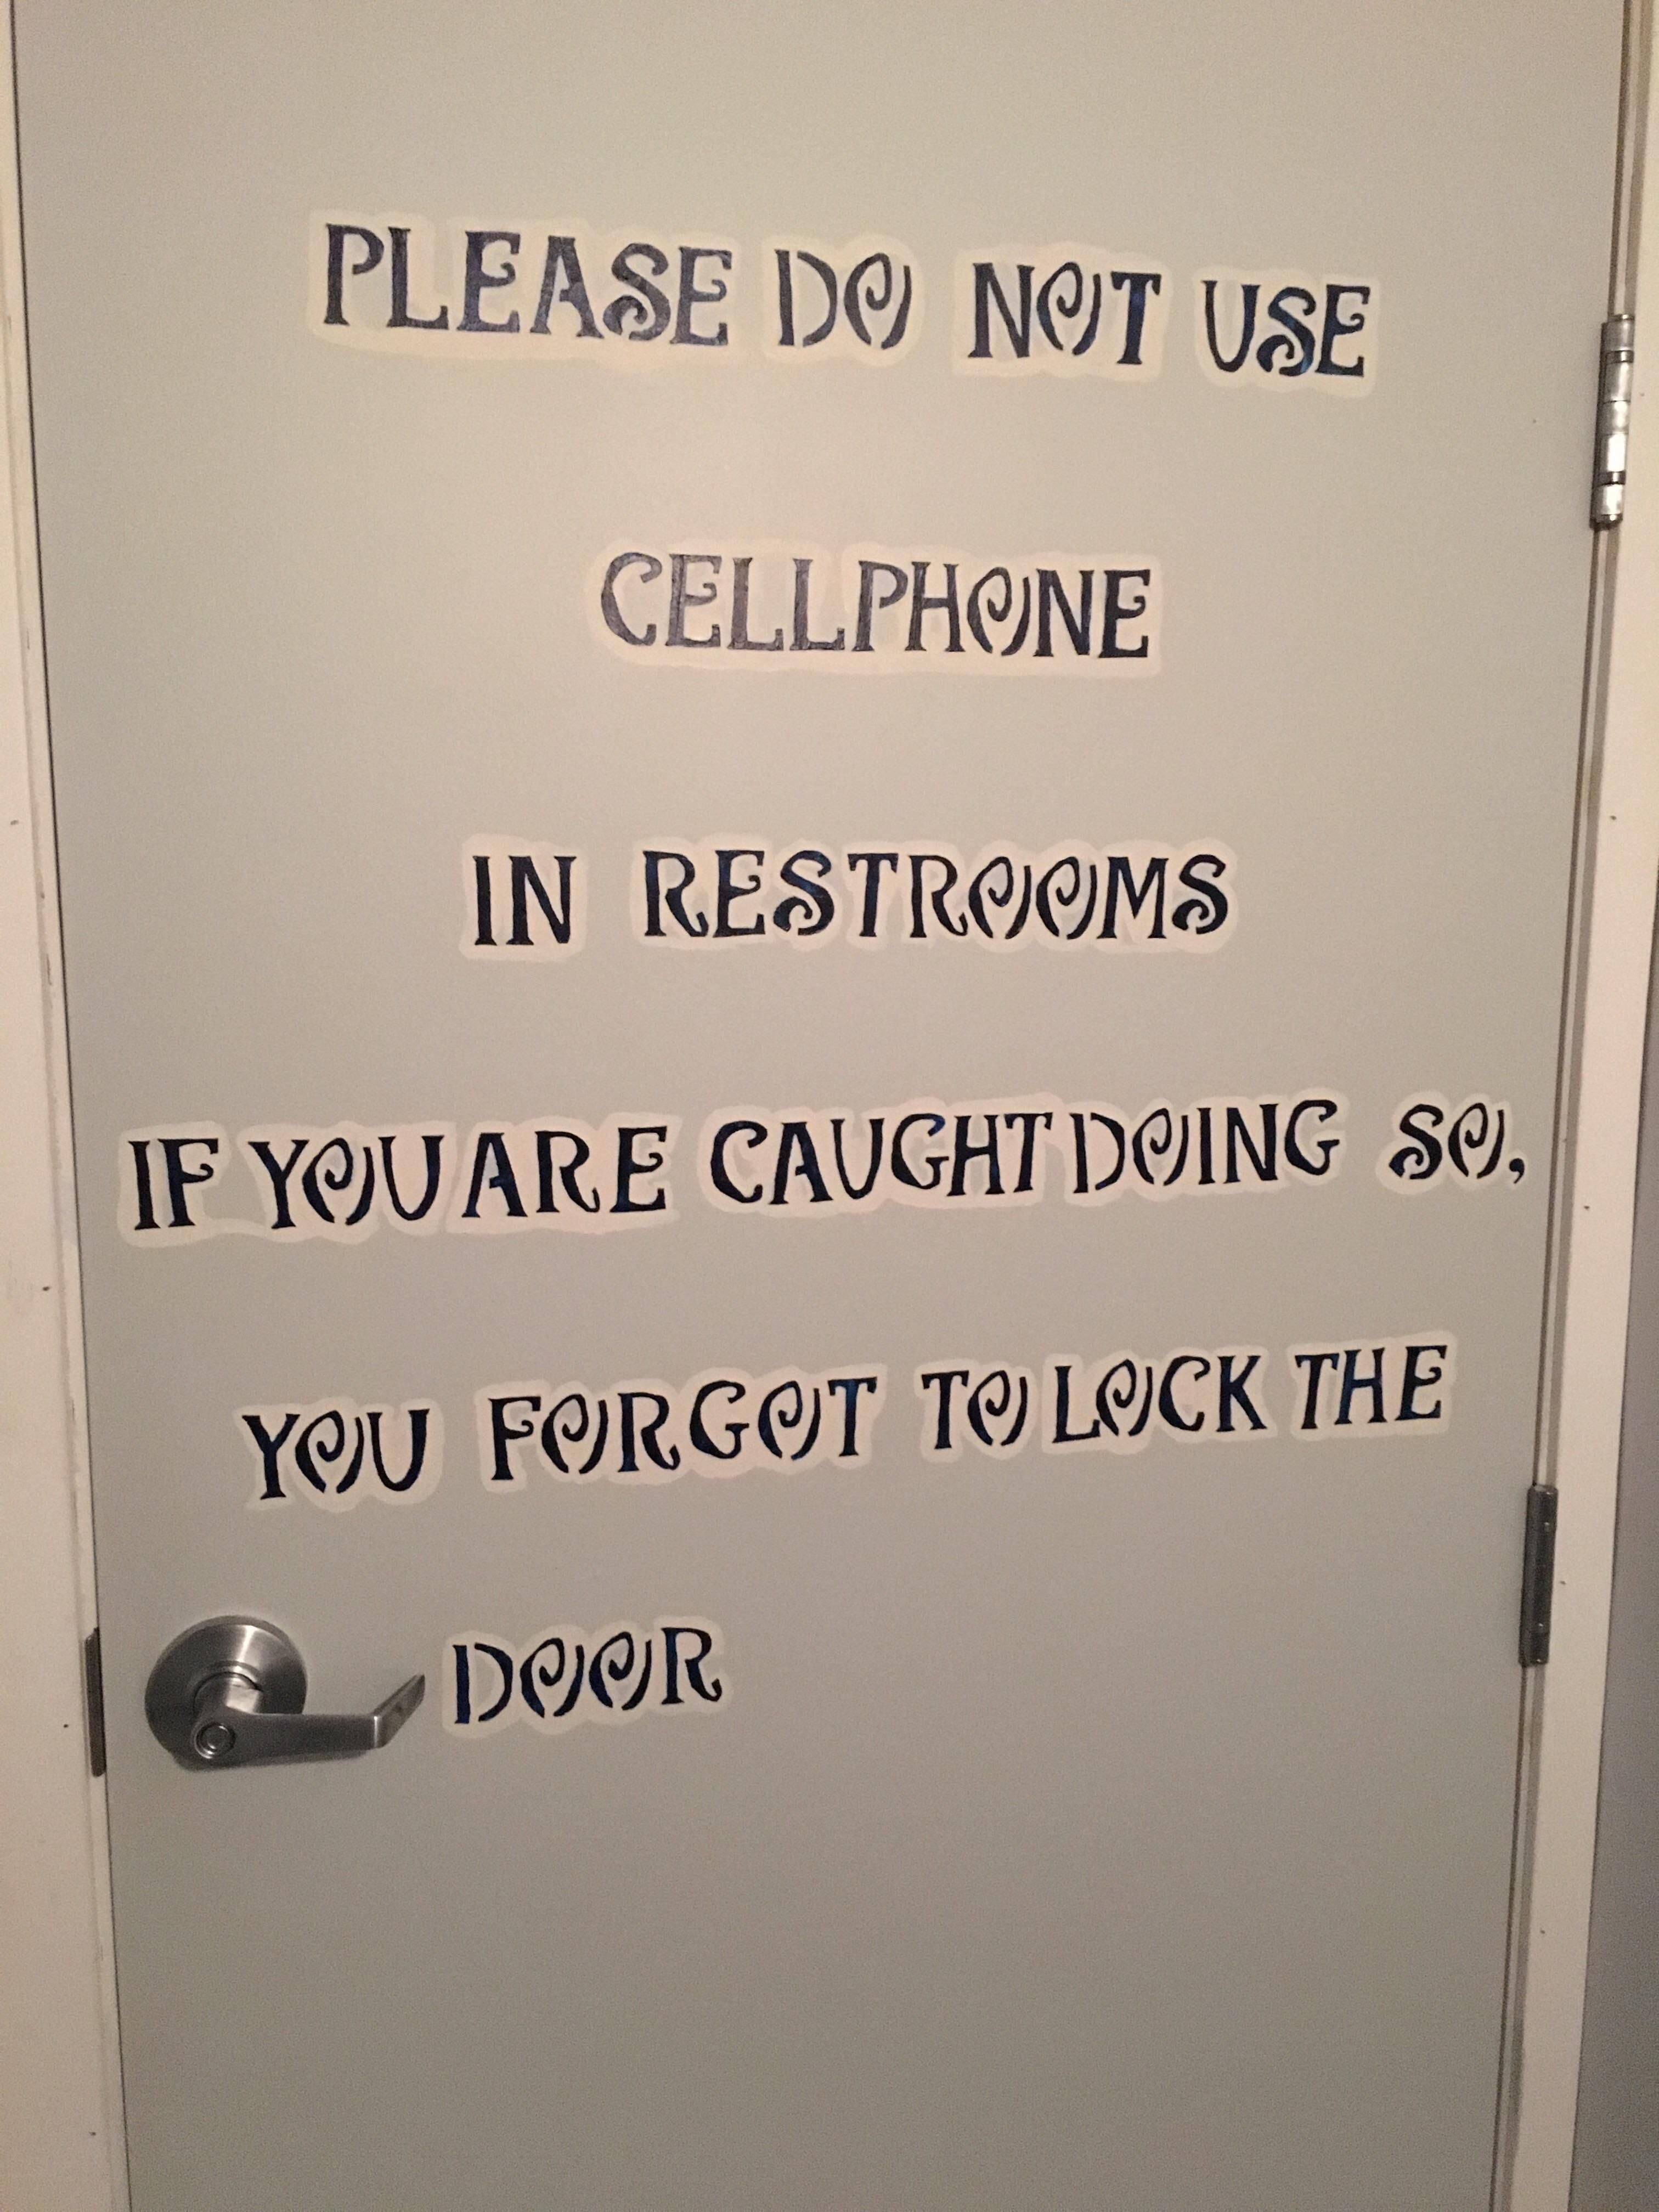 Please do not use cellphone...